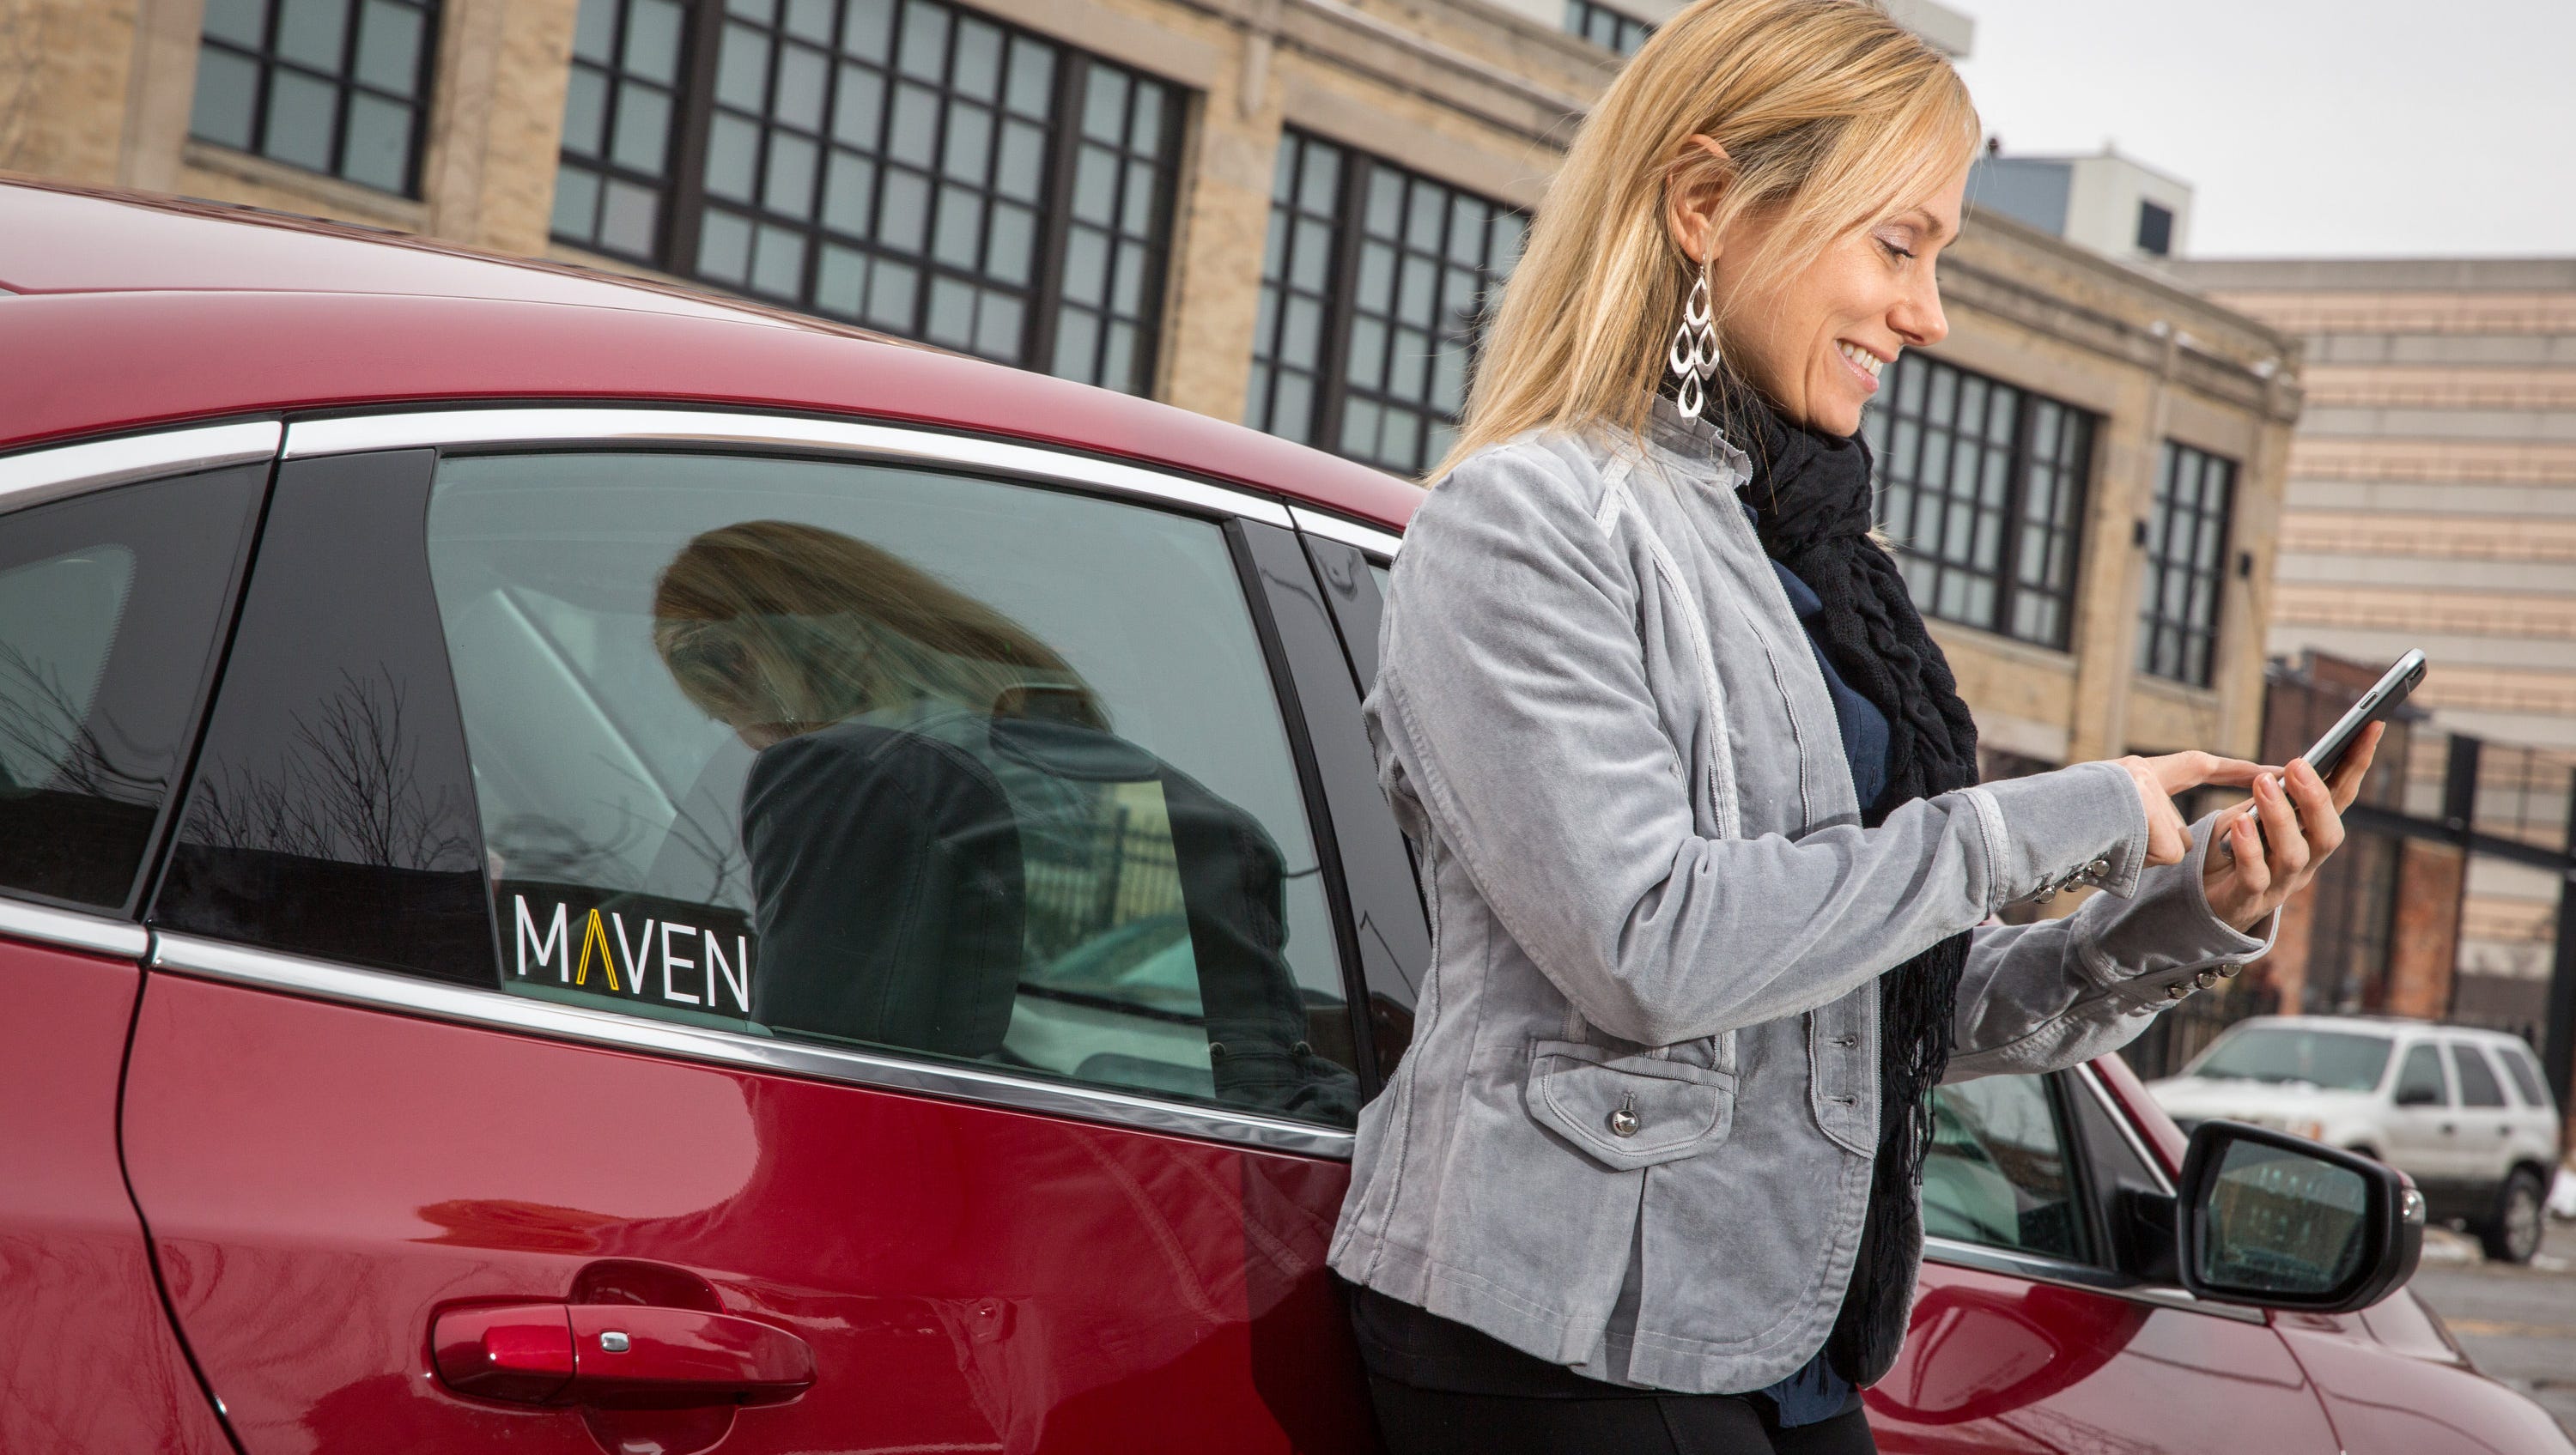 Gm To End Maven Car Sharing Service After Four Years